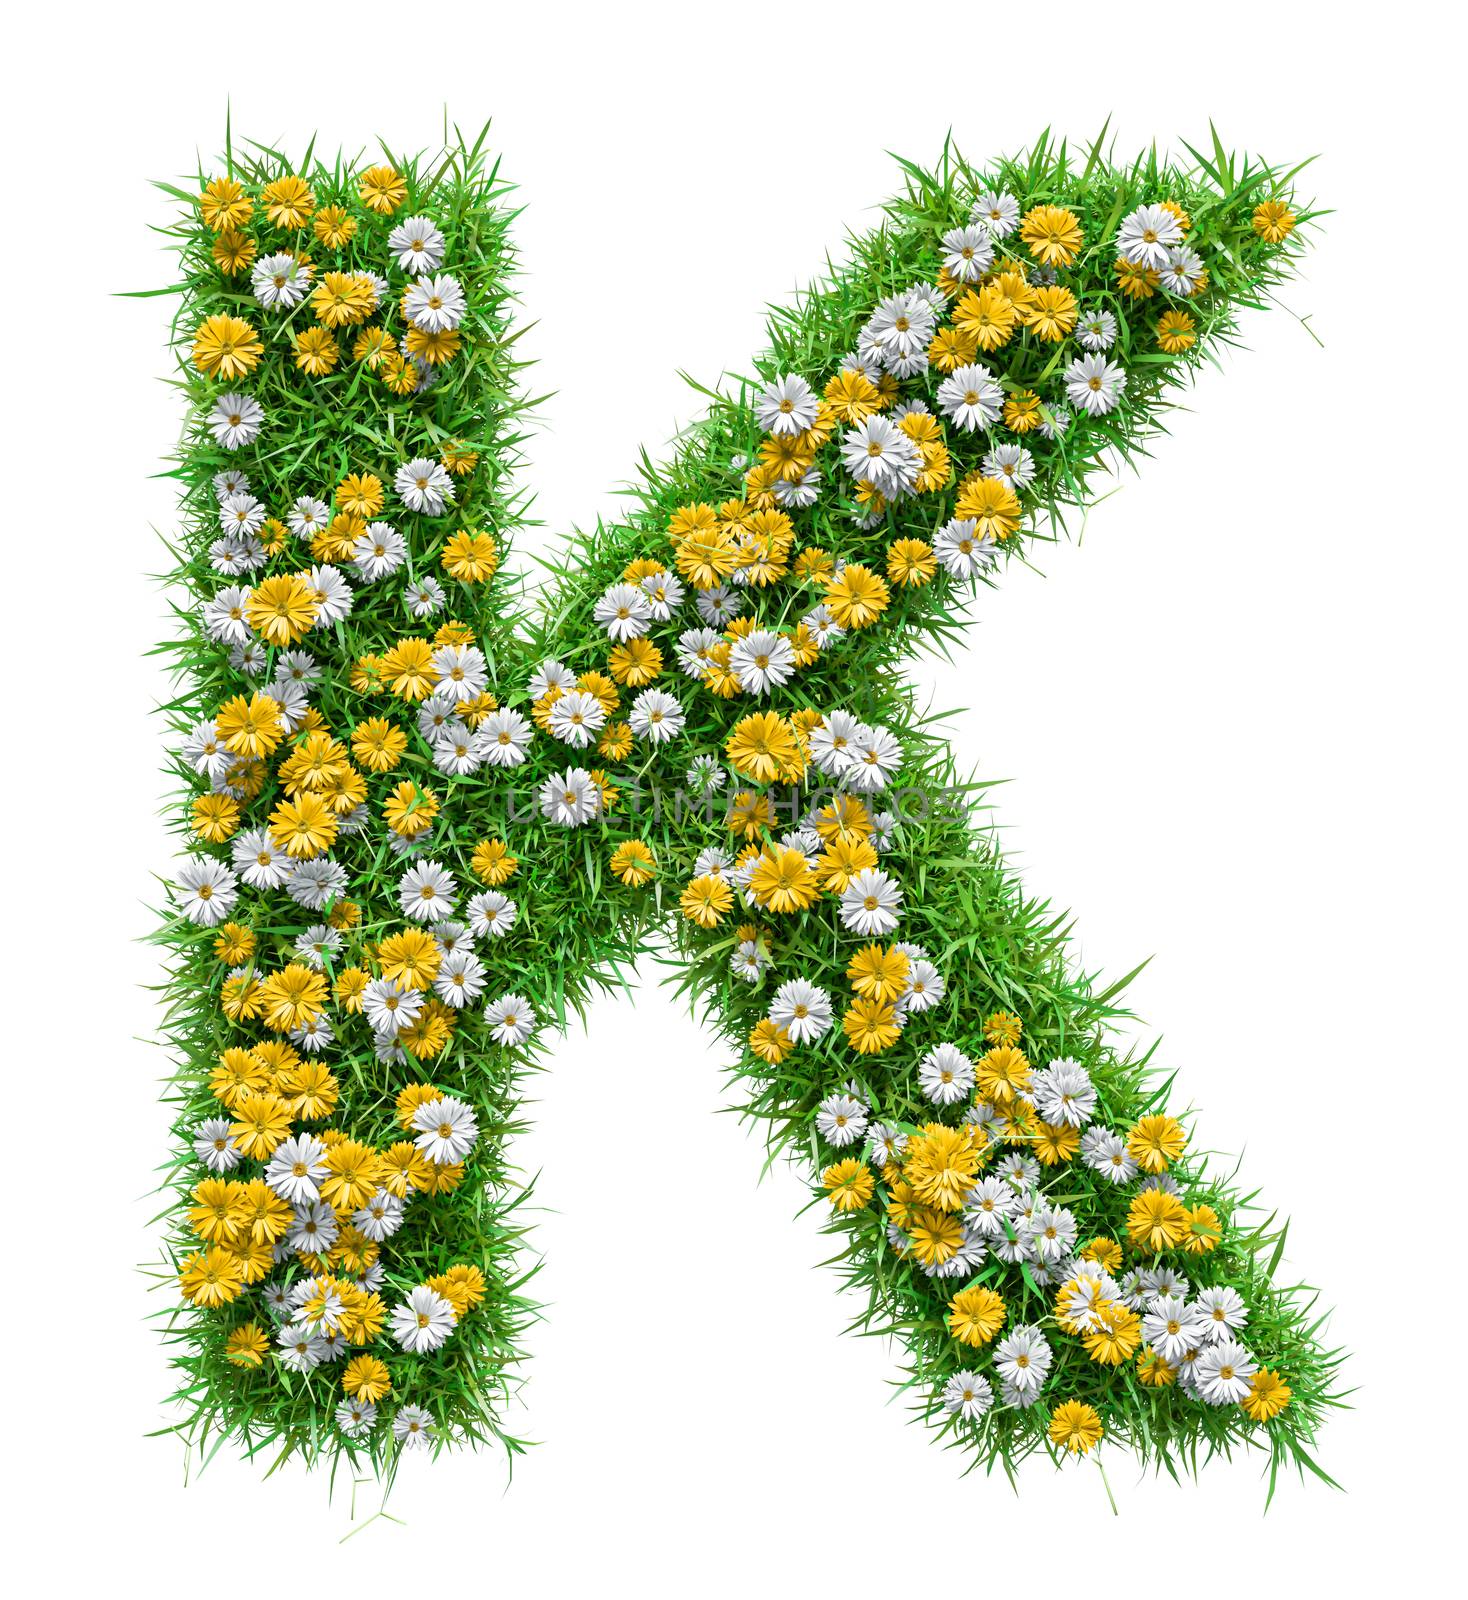 Letter K Of Green Grass And Flowers by cherezoff